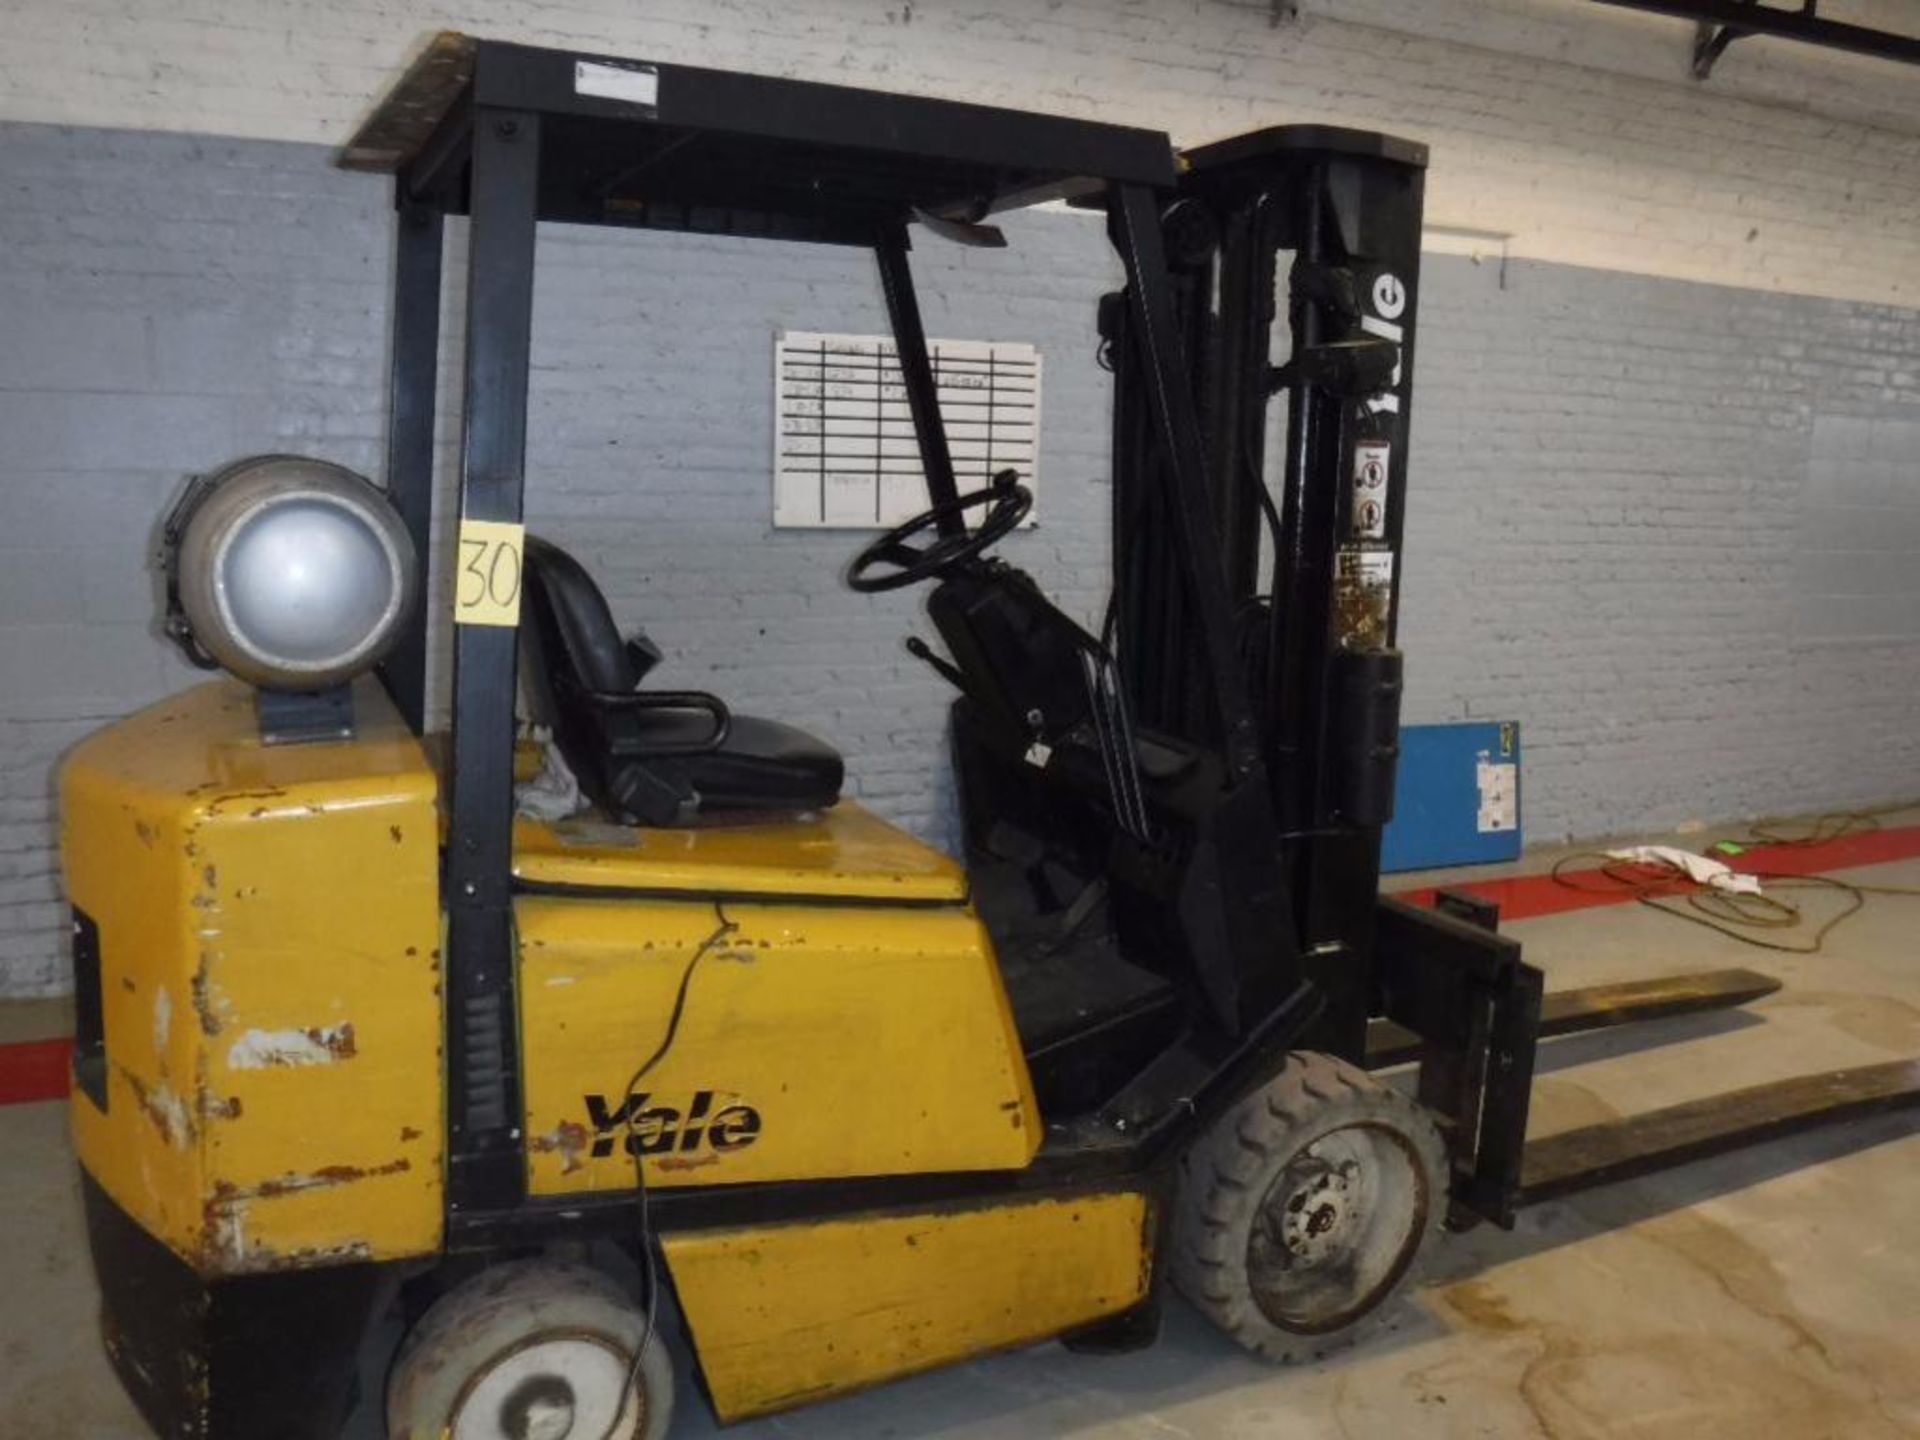 Yale Forklift 6000 #cap, 188" Lift, LP Model CLC060TENUAE083- LATE DELIVERY 11/28/17 - Image 4 of 4